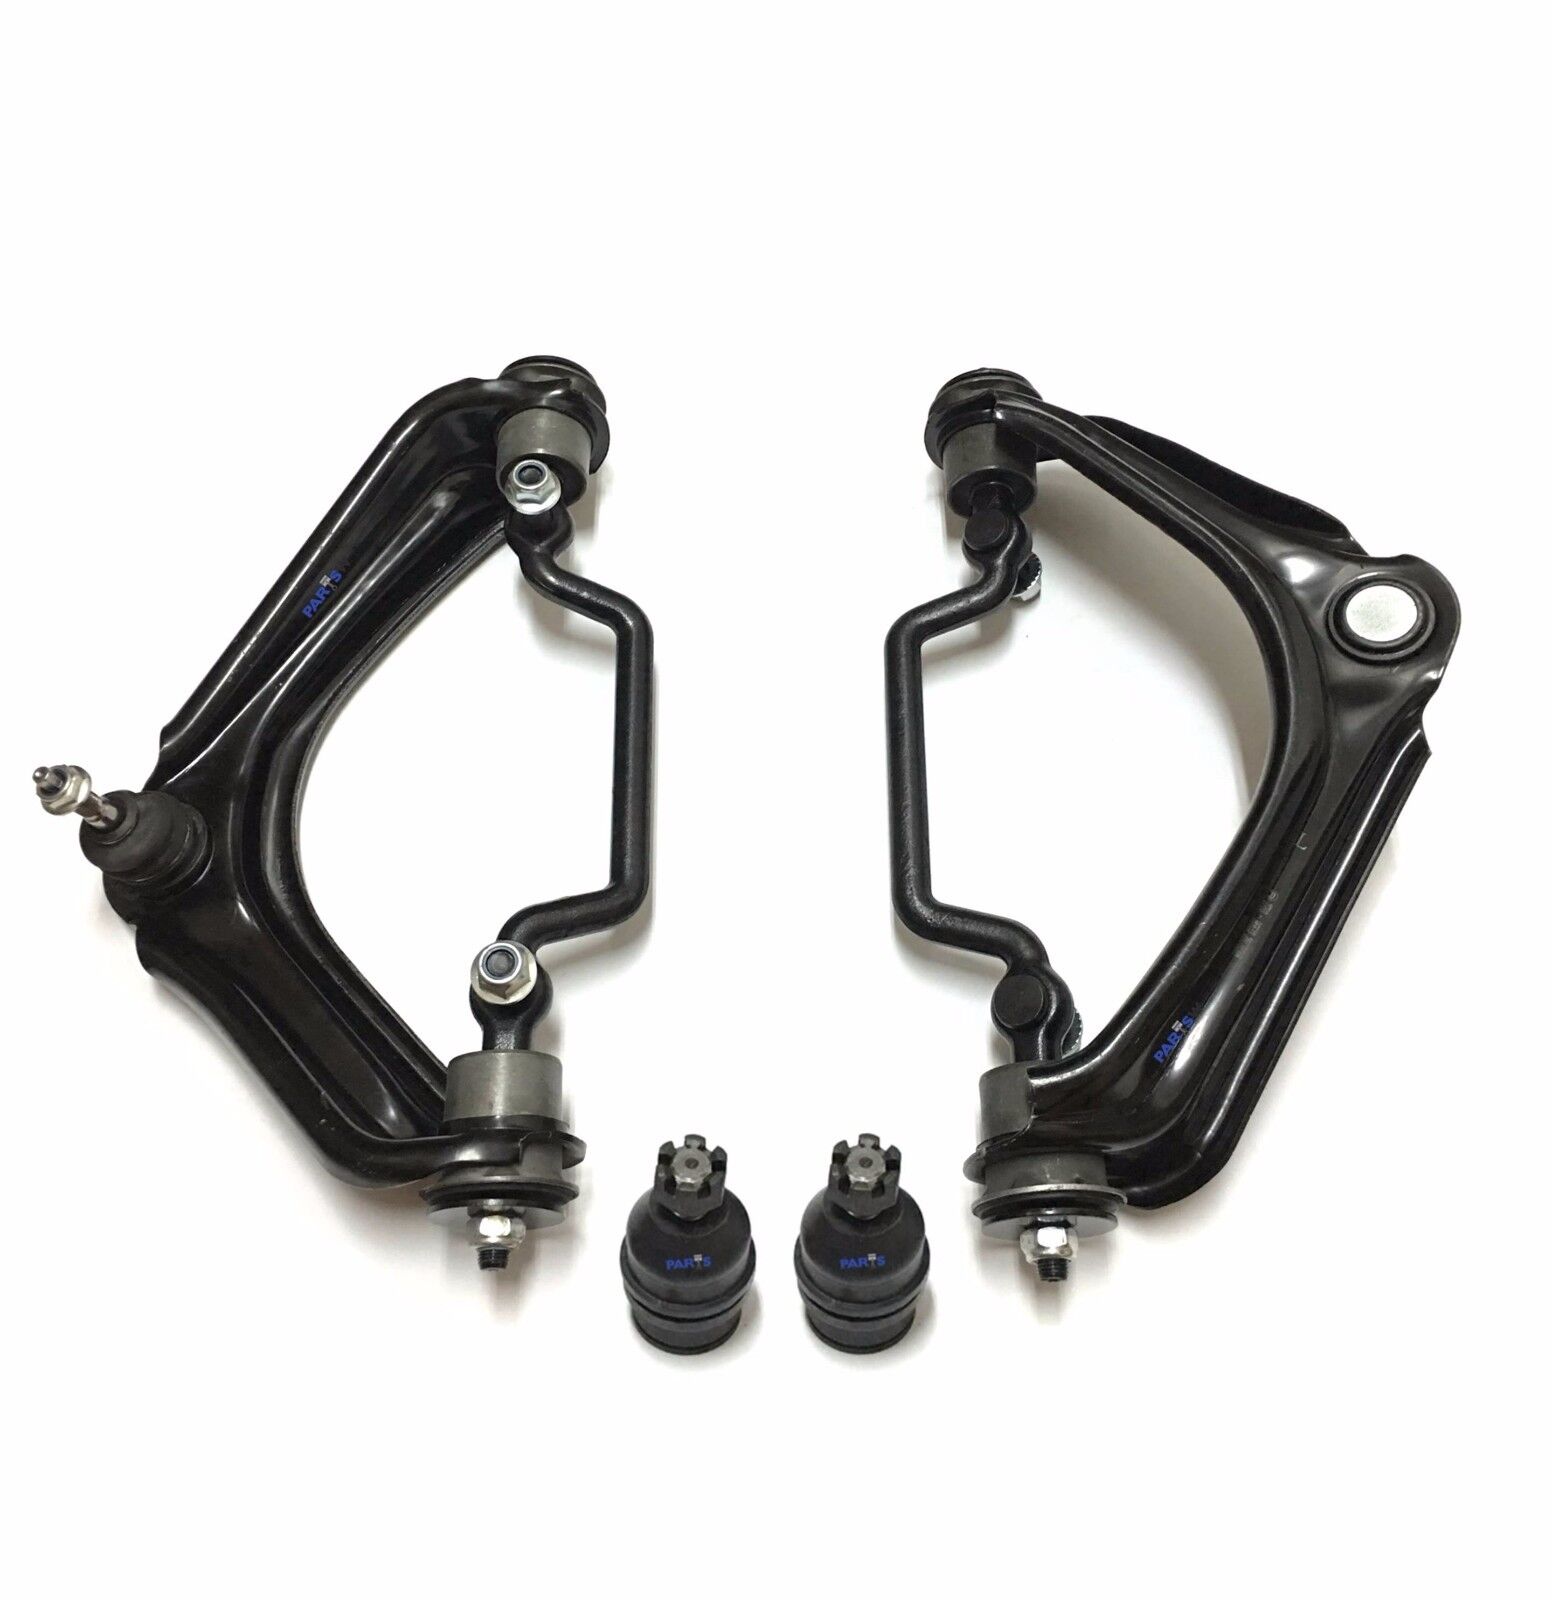 2 Pc Kit Upper Control Arm & Both Lower Ball Joint for 2002-05 Ford Explorer